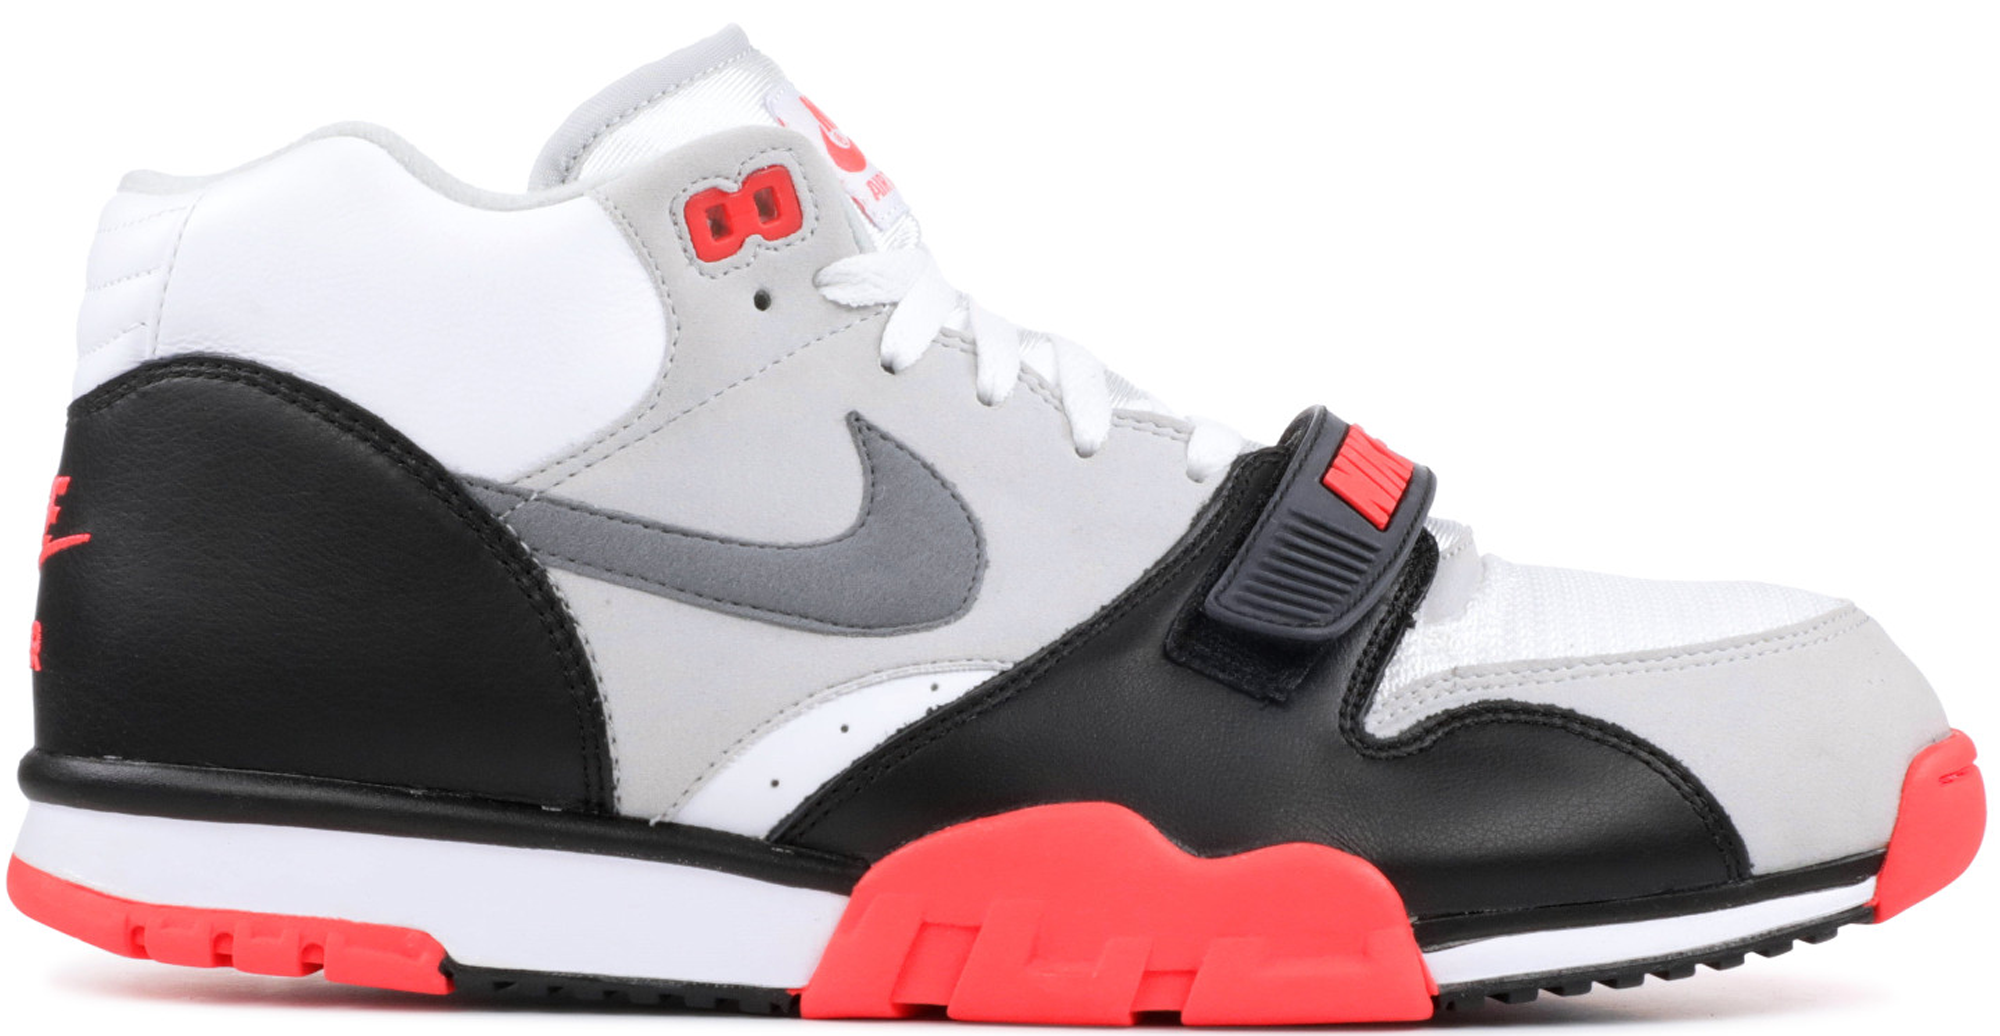 Nike Air Trainer 1 Mid Infrared 